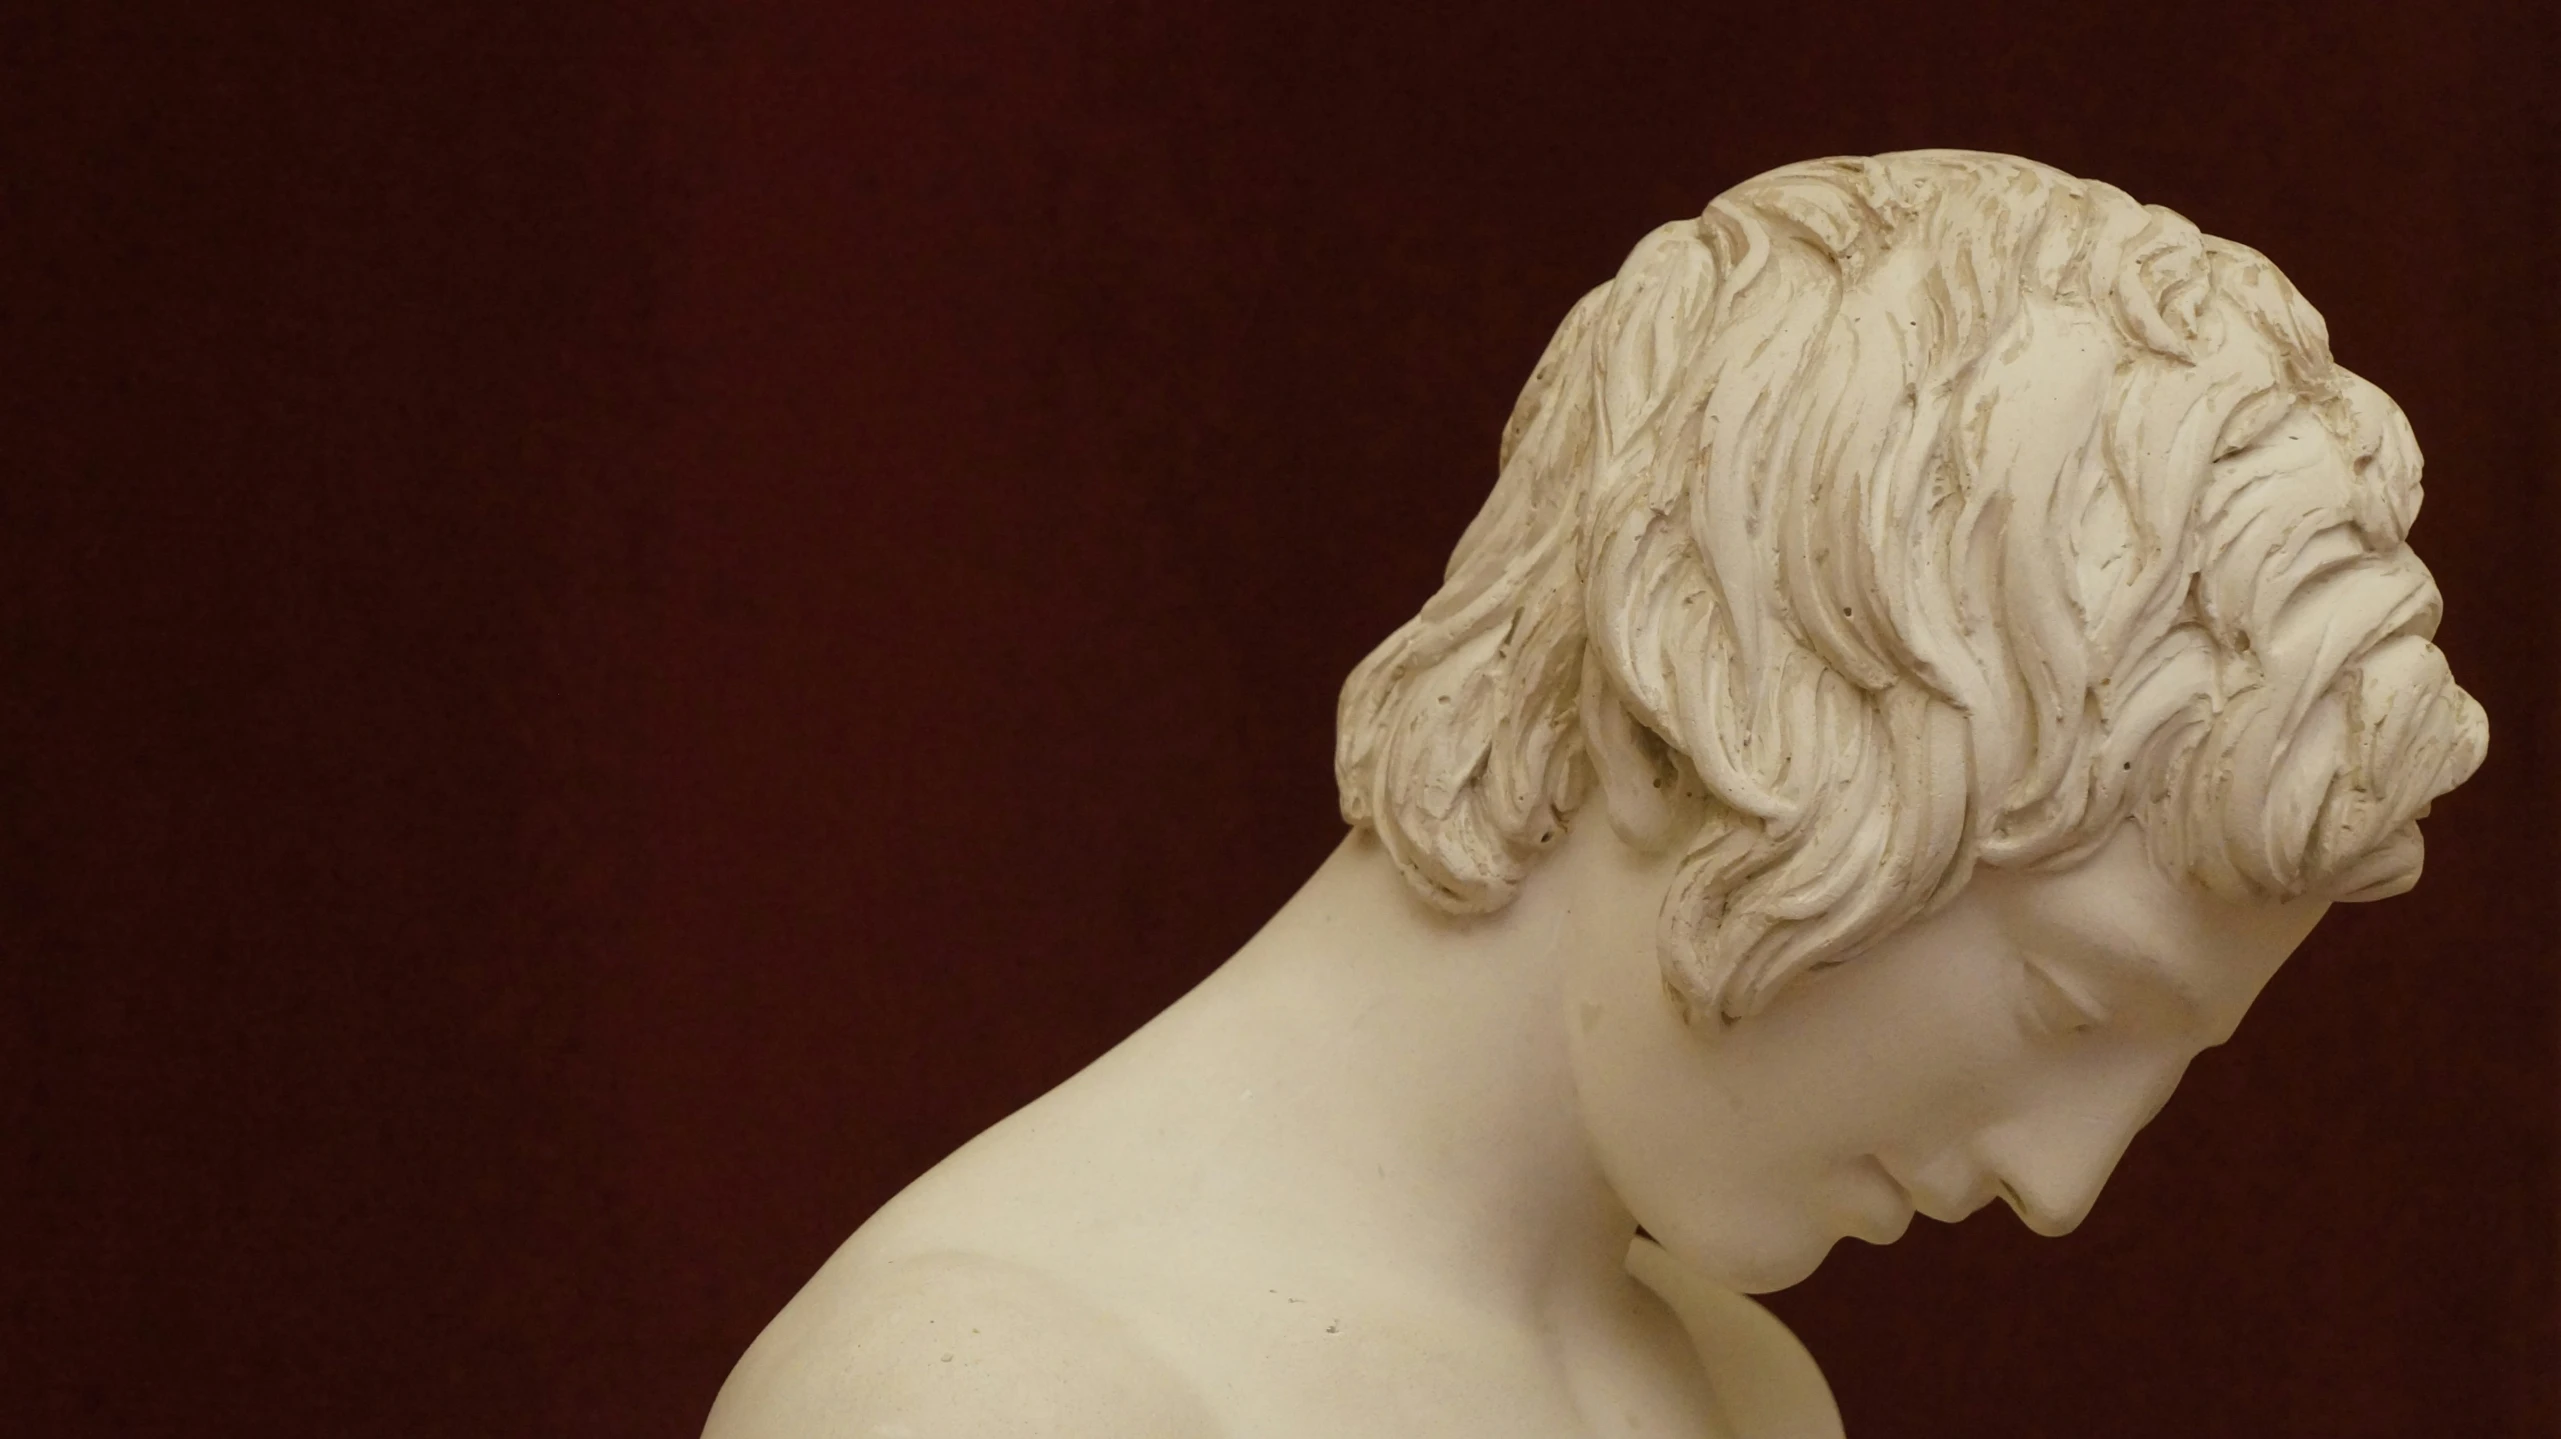 a sculpture of a young man head is in profile